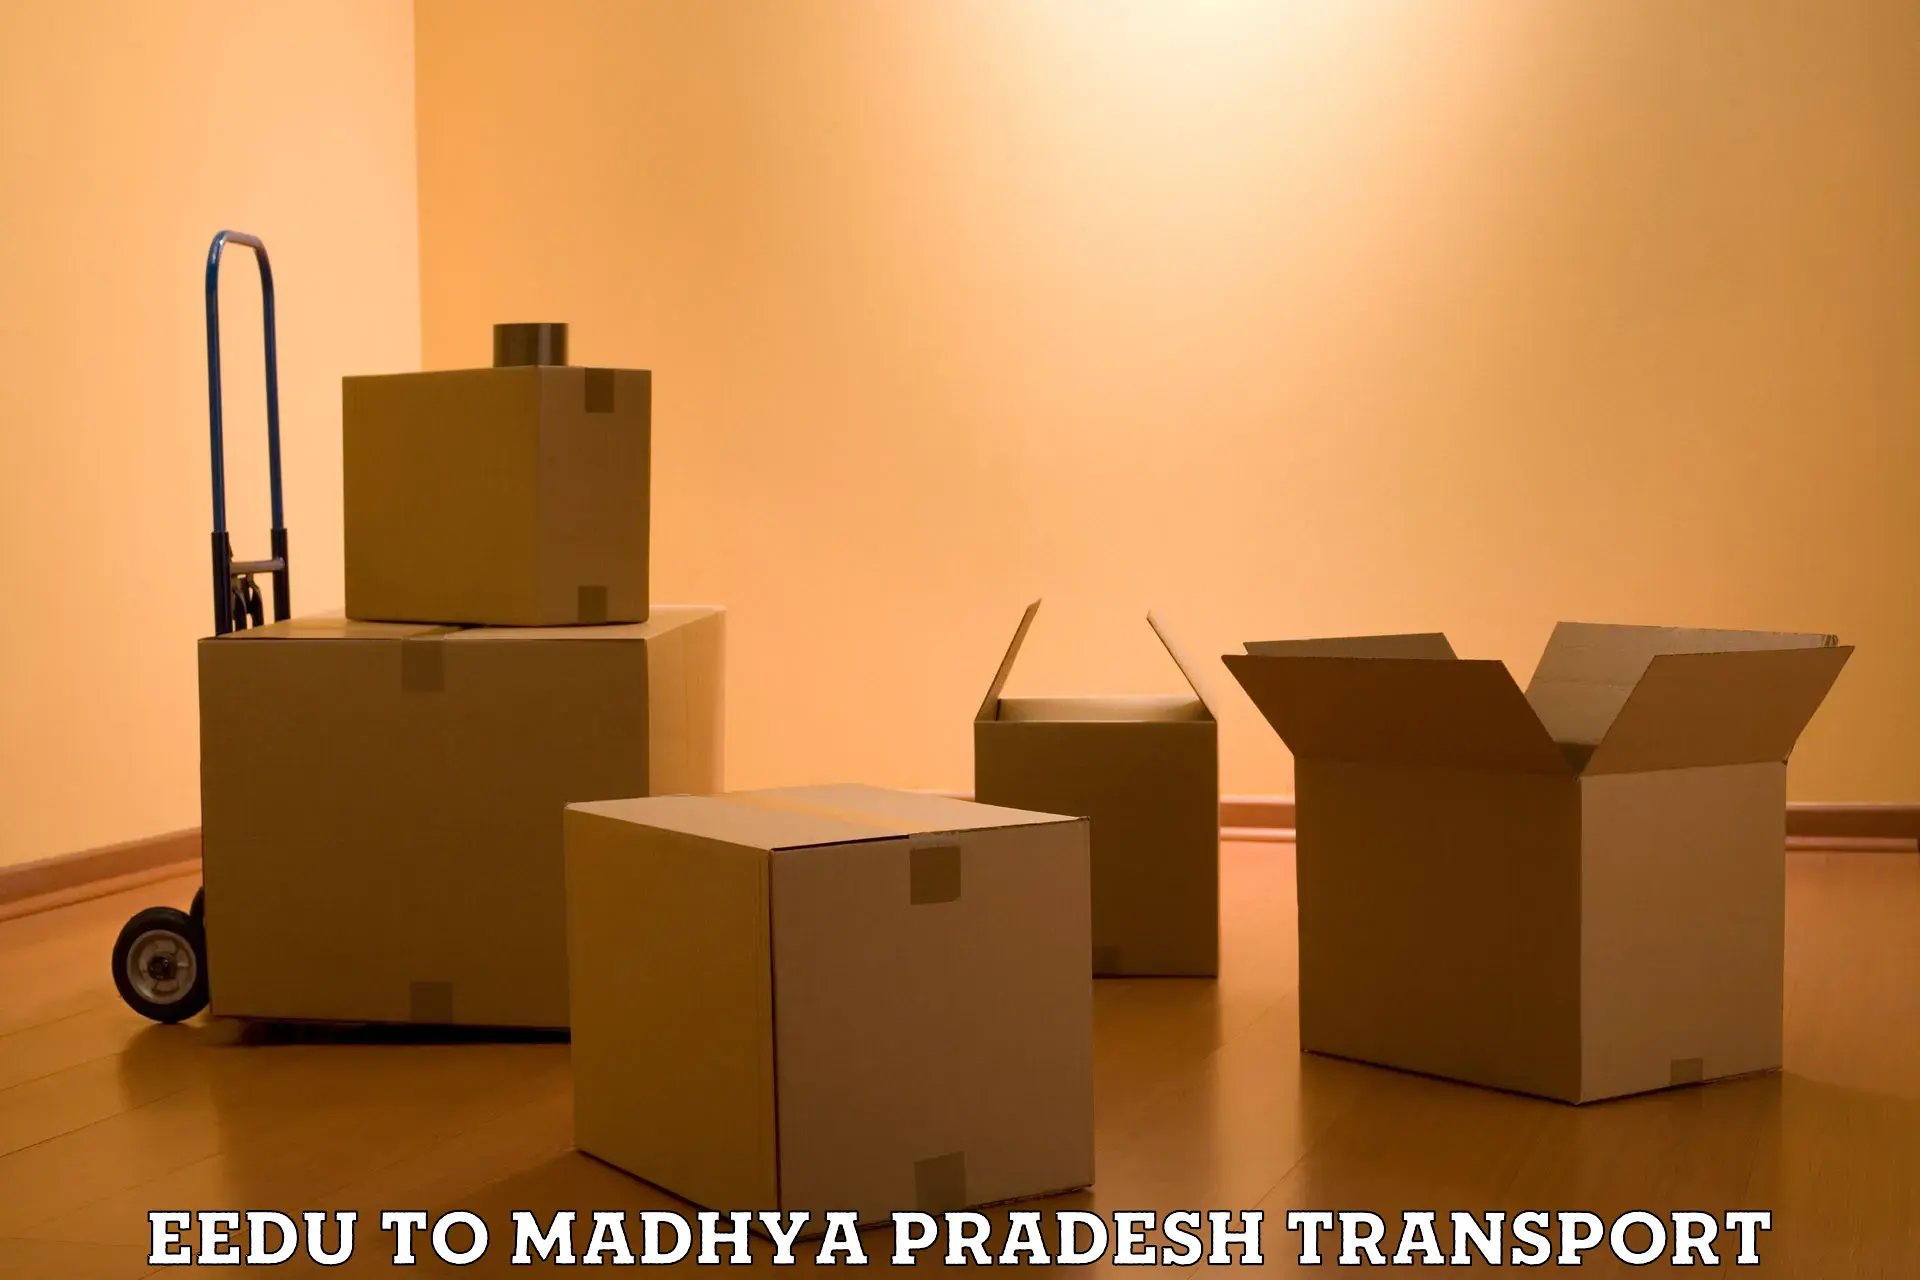 Delivery service Eedu to Indore